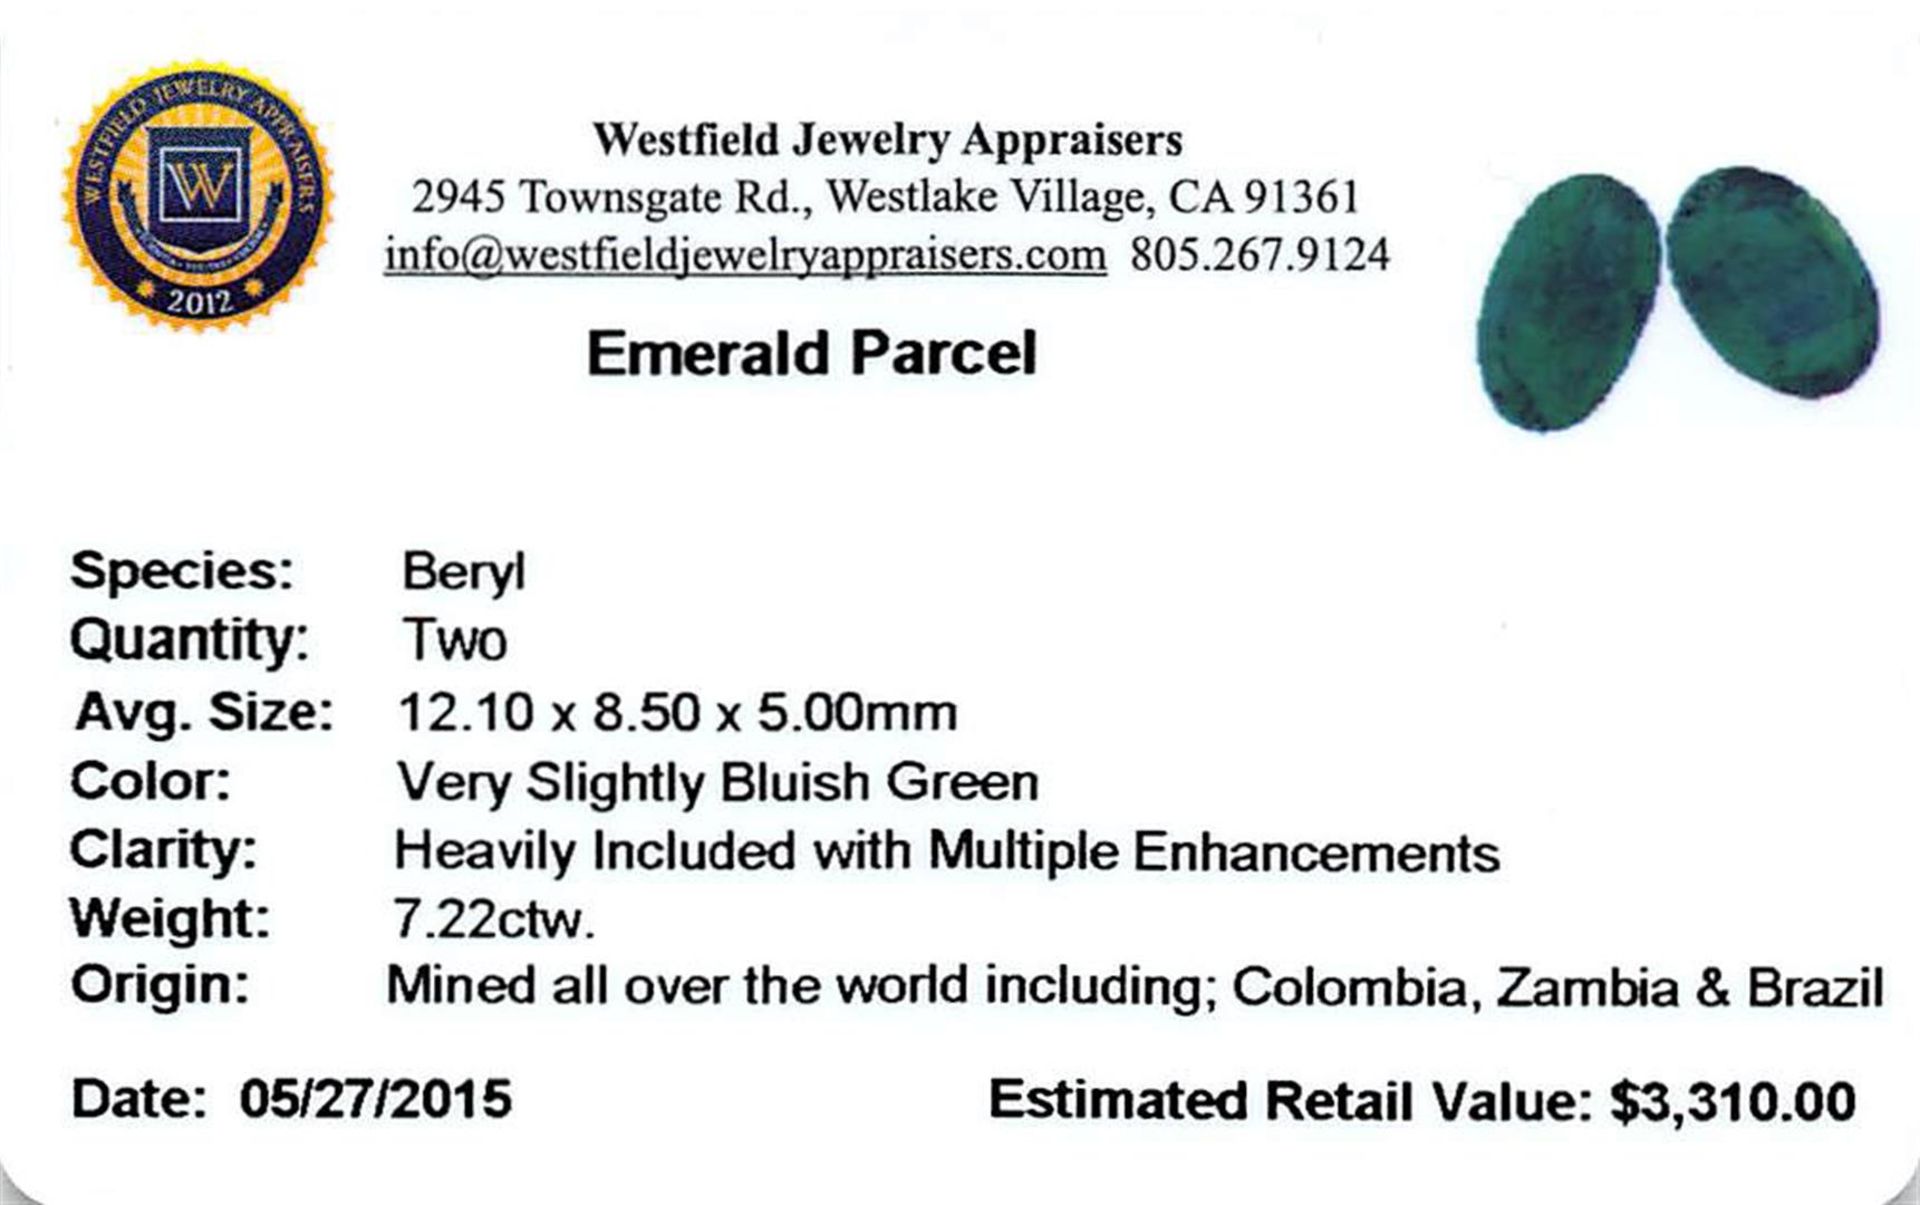 7.22 ctw Oval Mixed Emeralds Parcel - Image 2 of 2